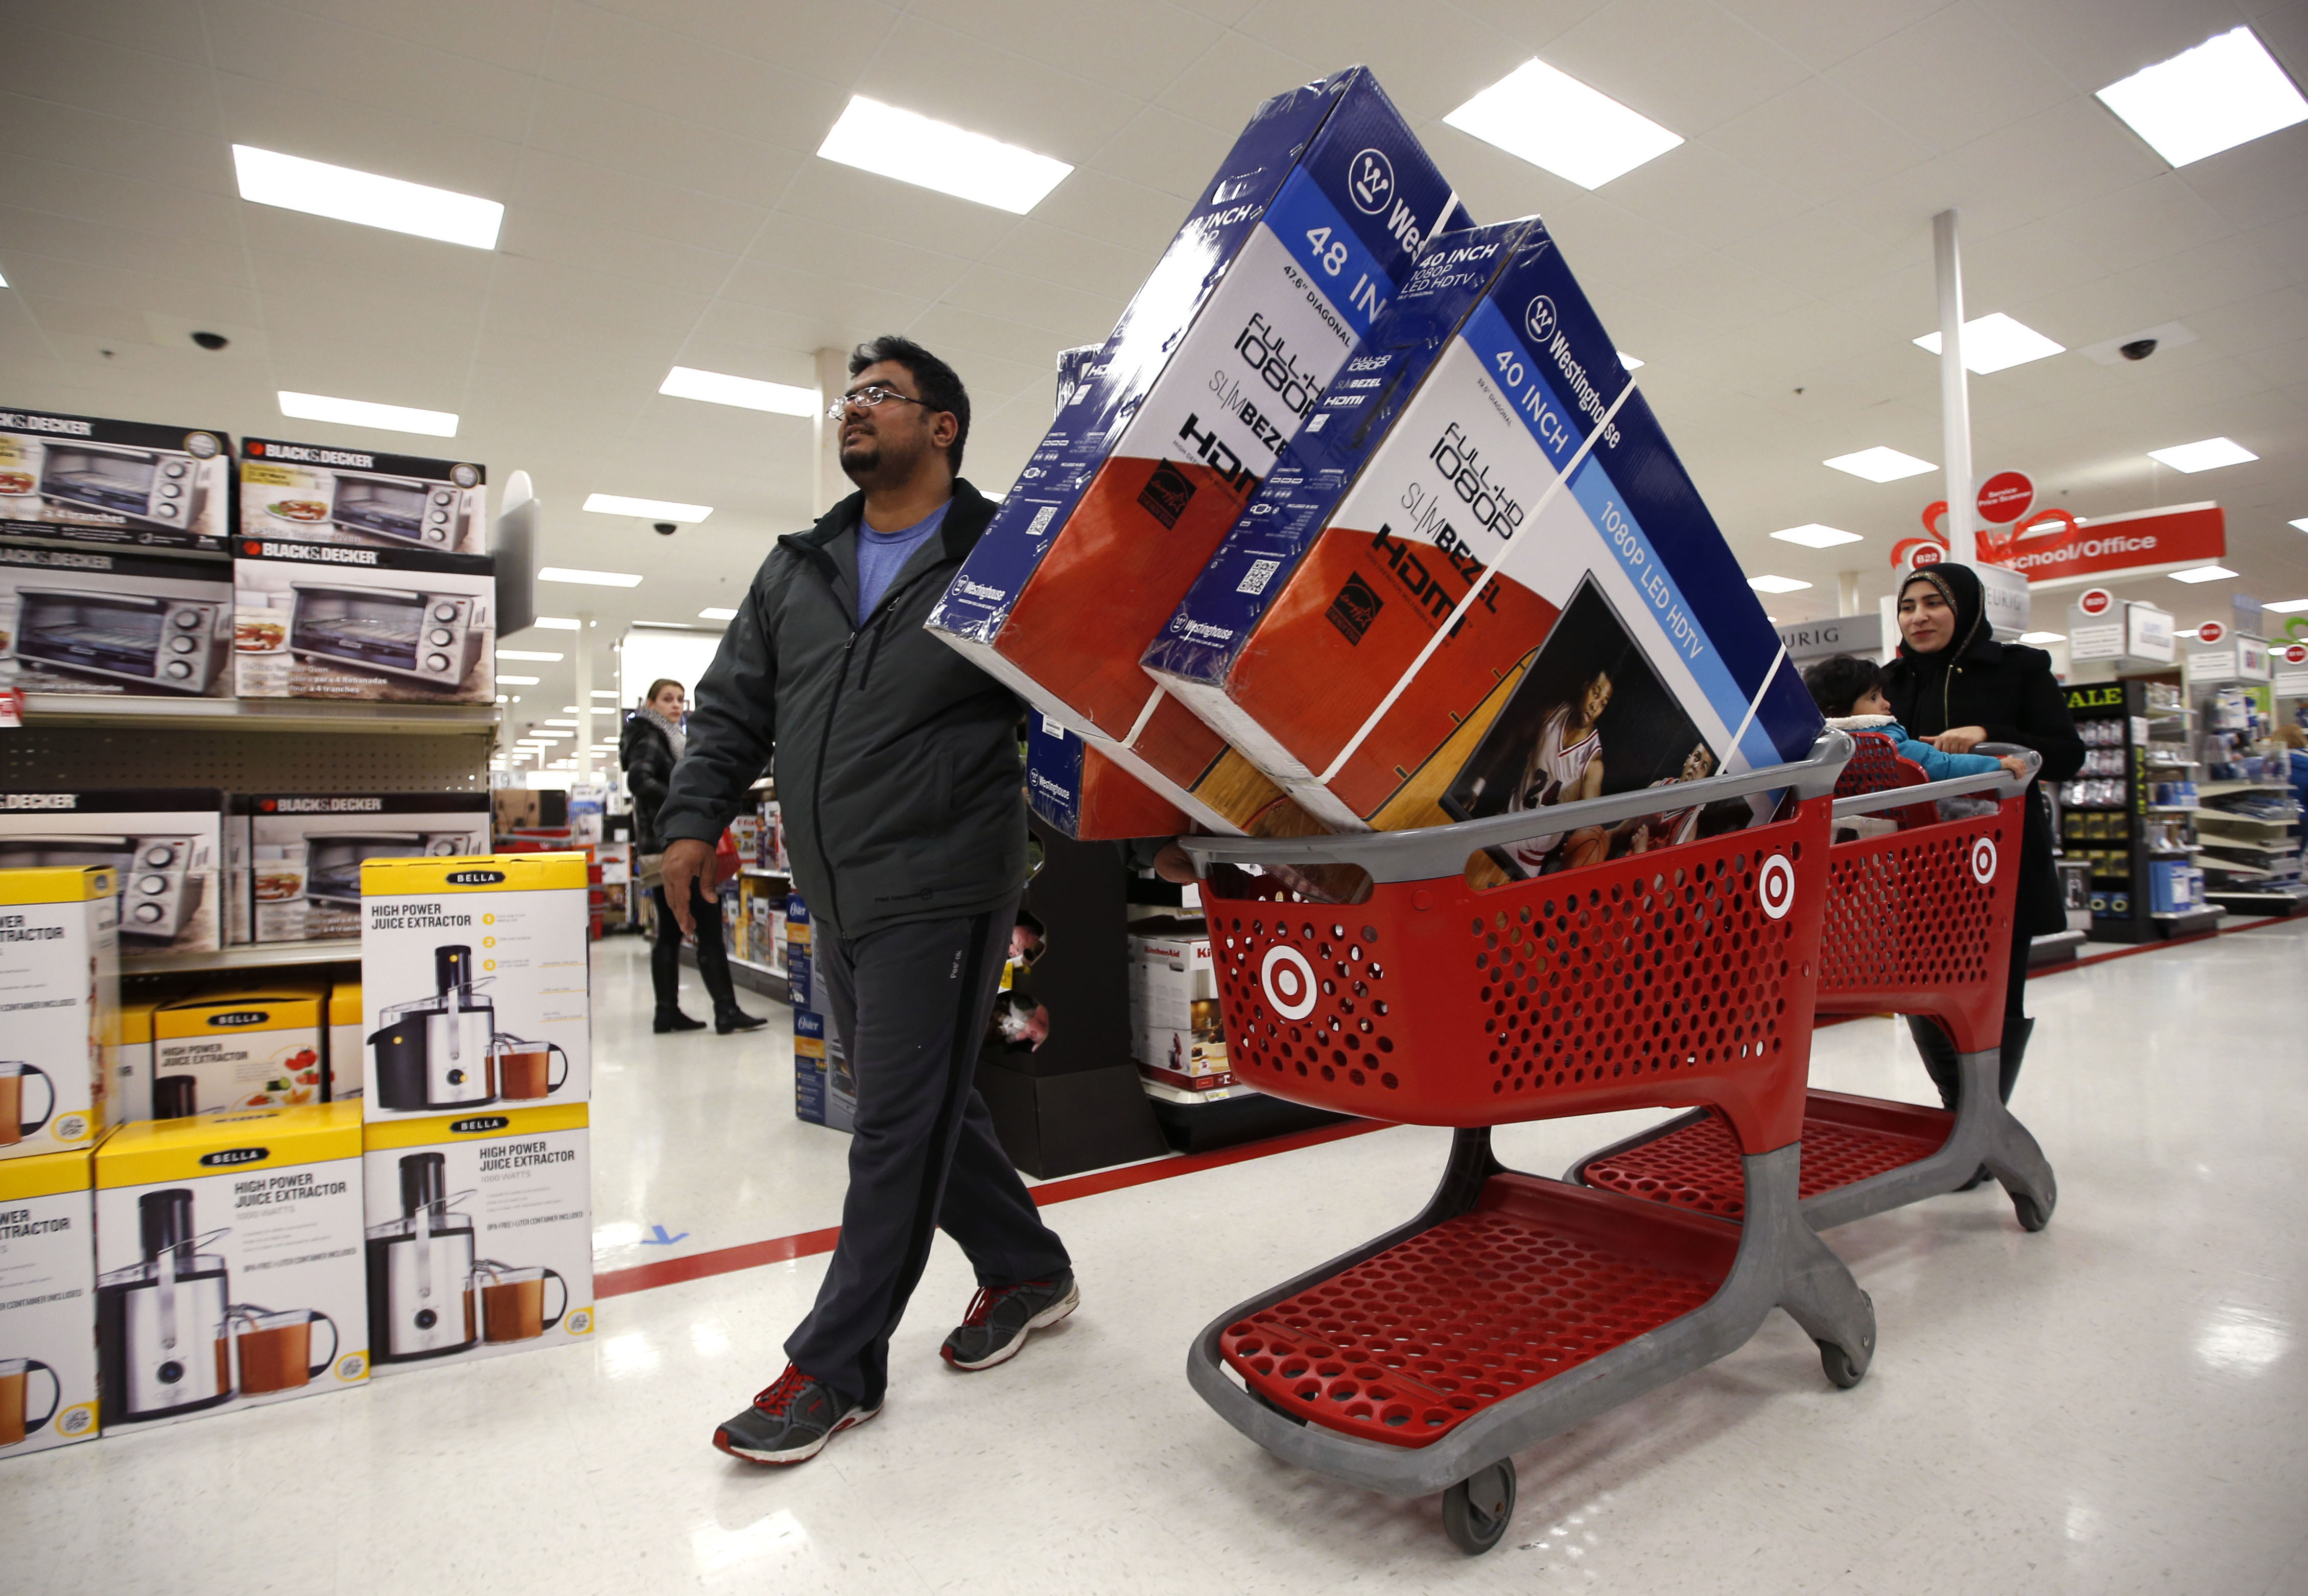 Black Friday Originally Had Dark Meaning – All About America - What Time Are Stores Opening For Black Friday 2014